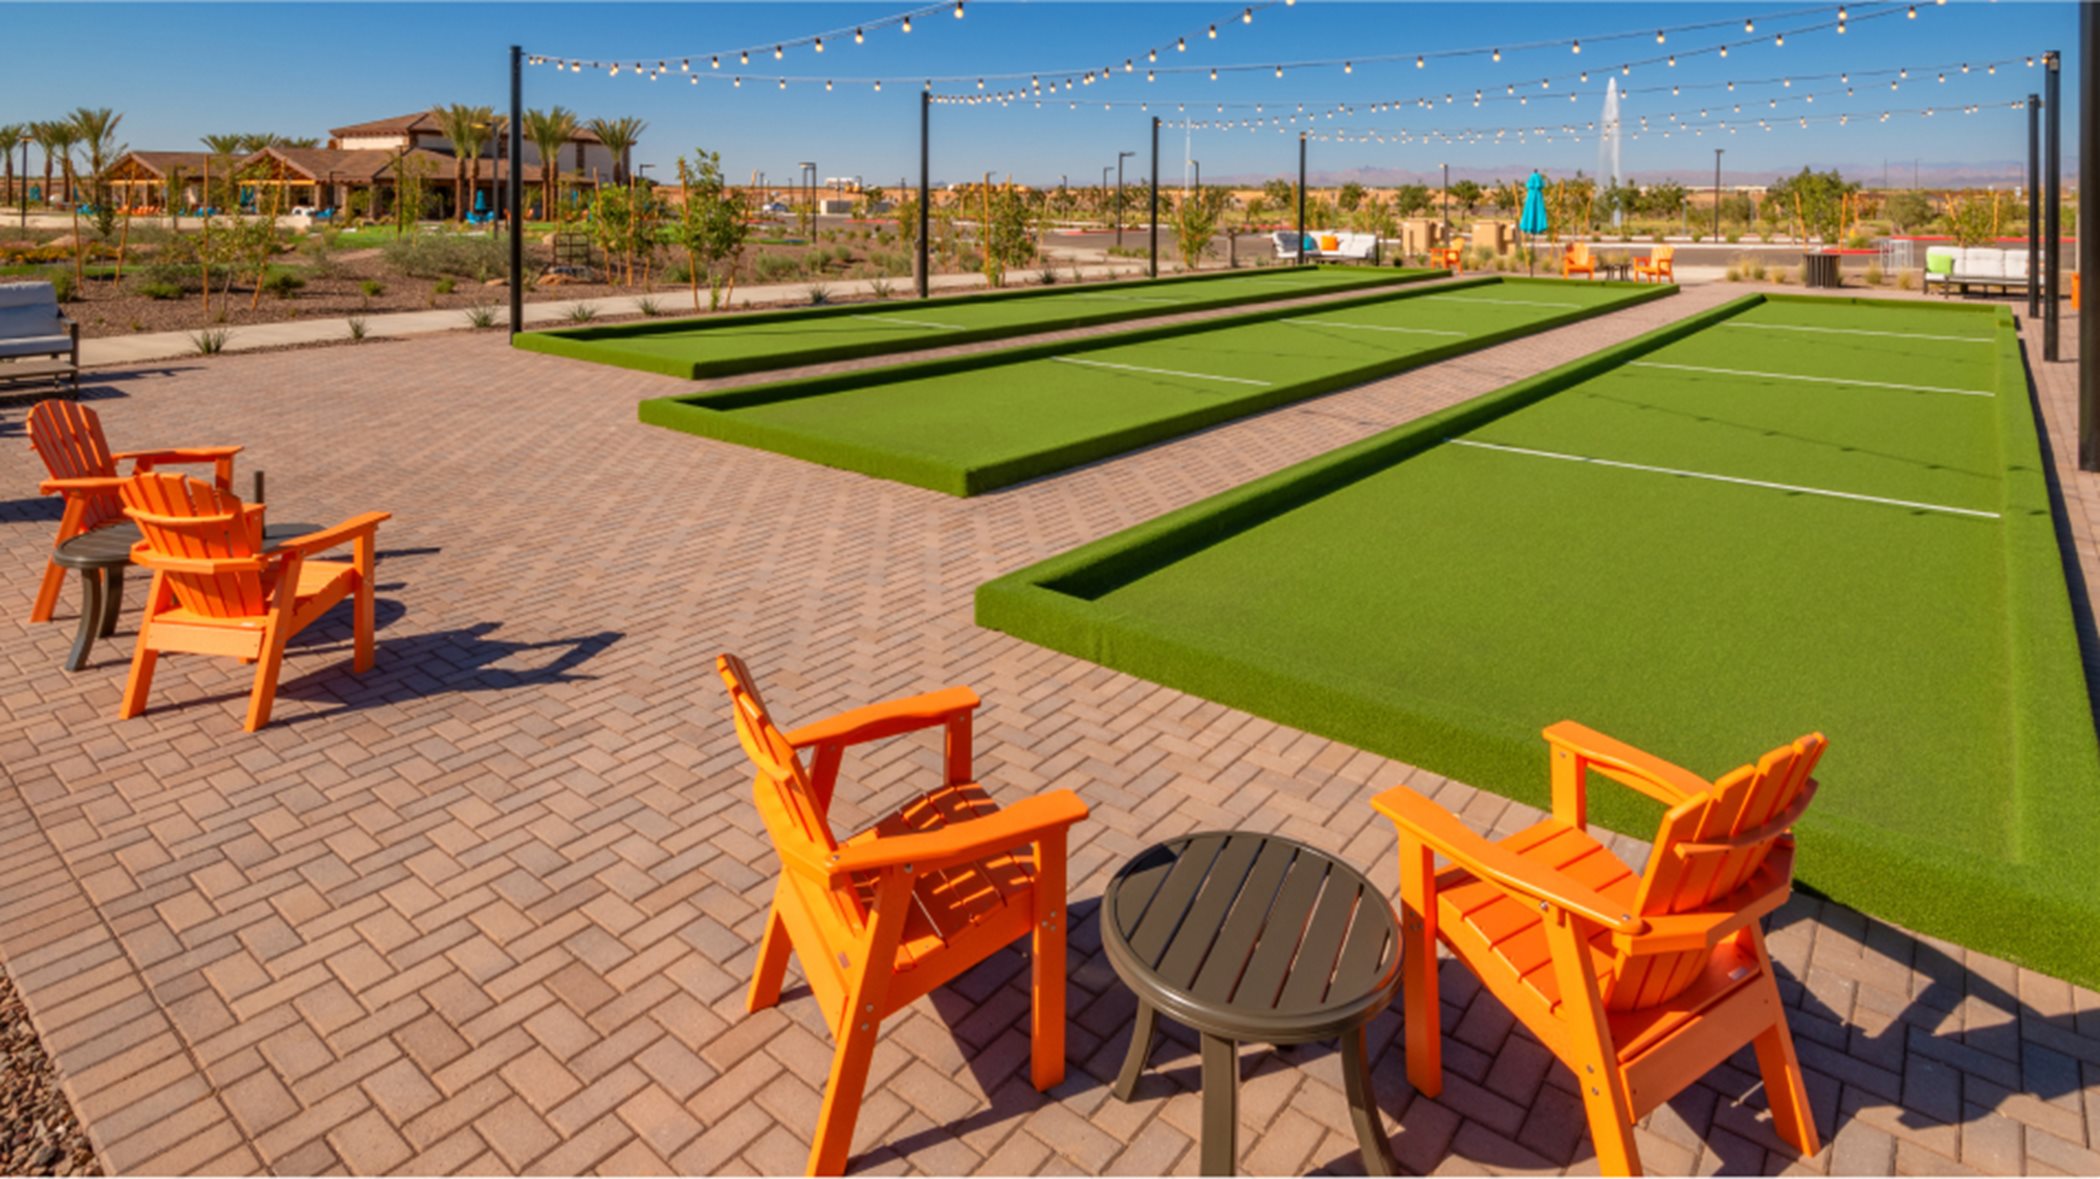 Bocce ball court  and picnic chairs